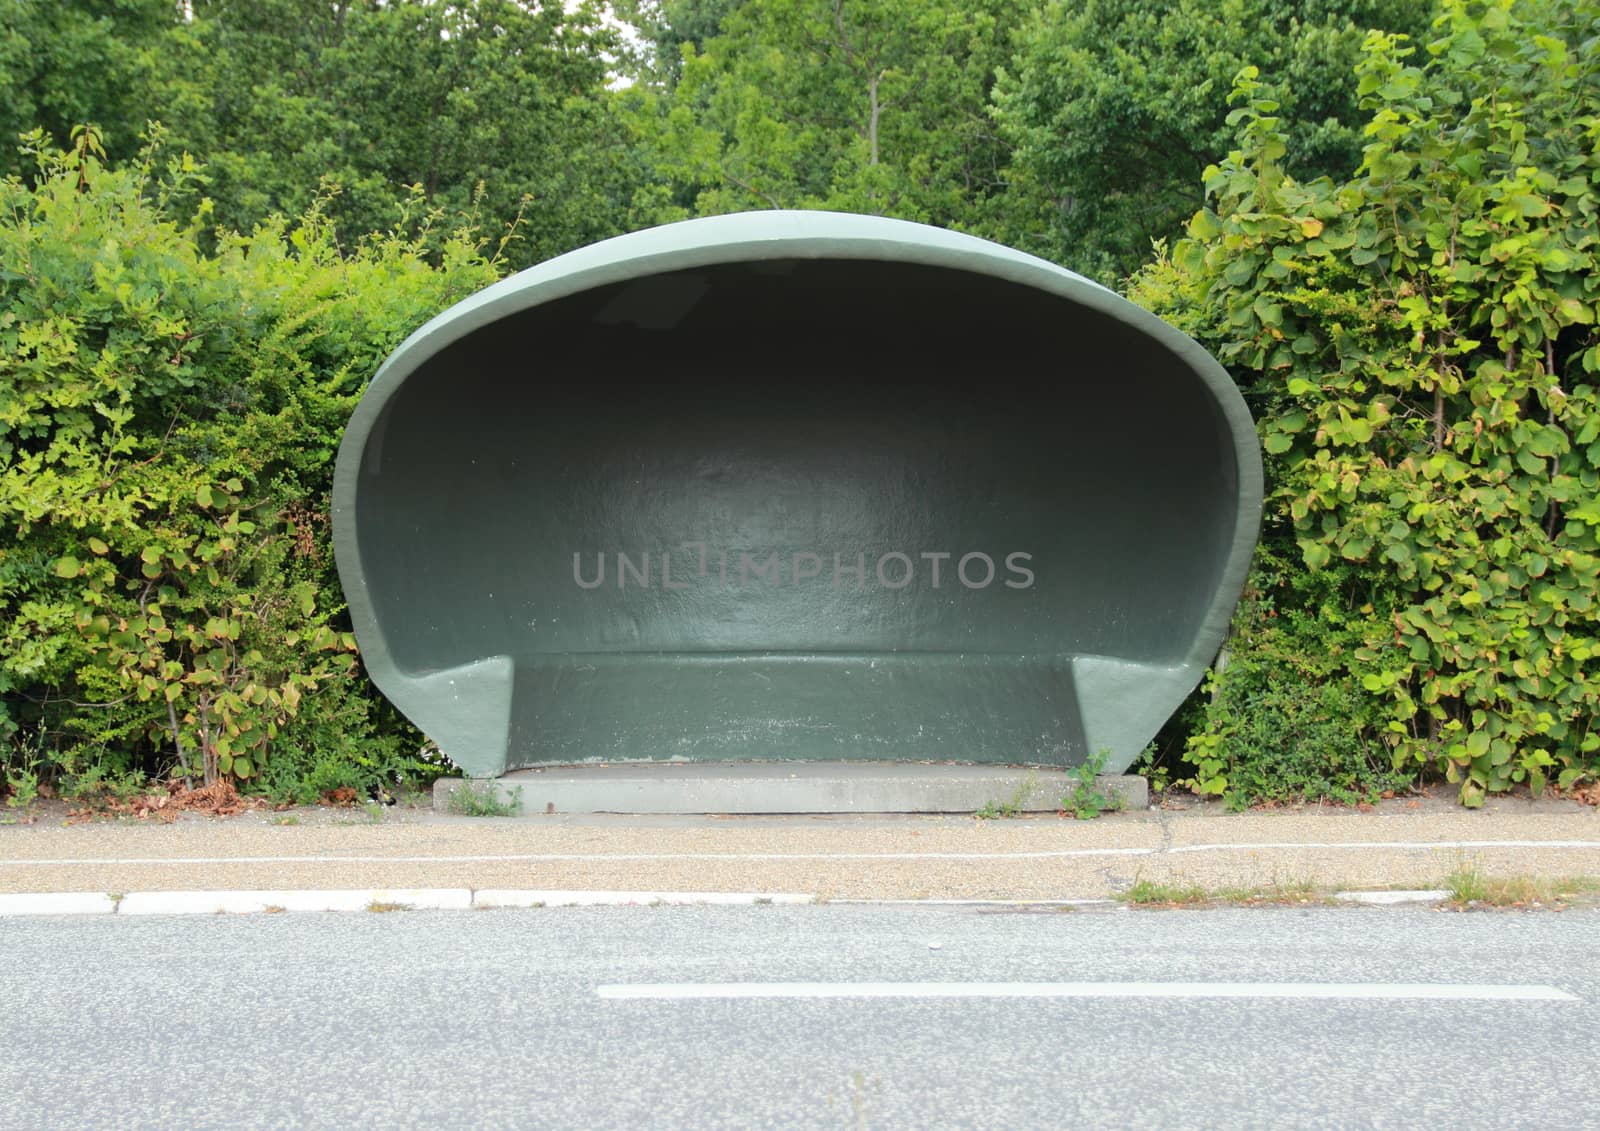 Special danish weather shelter at bus stop by HoleInTheBox